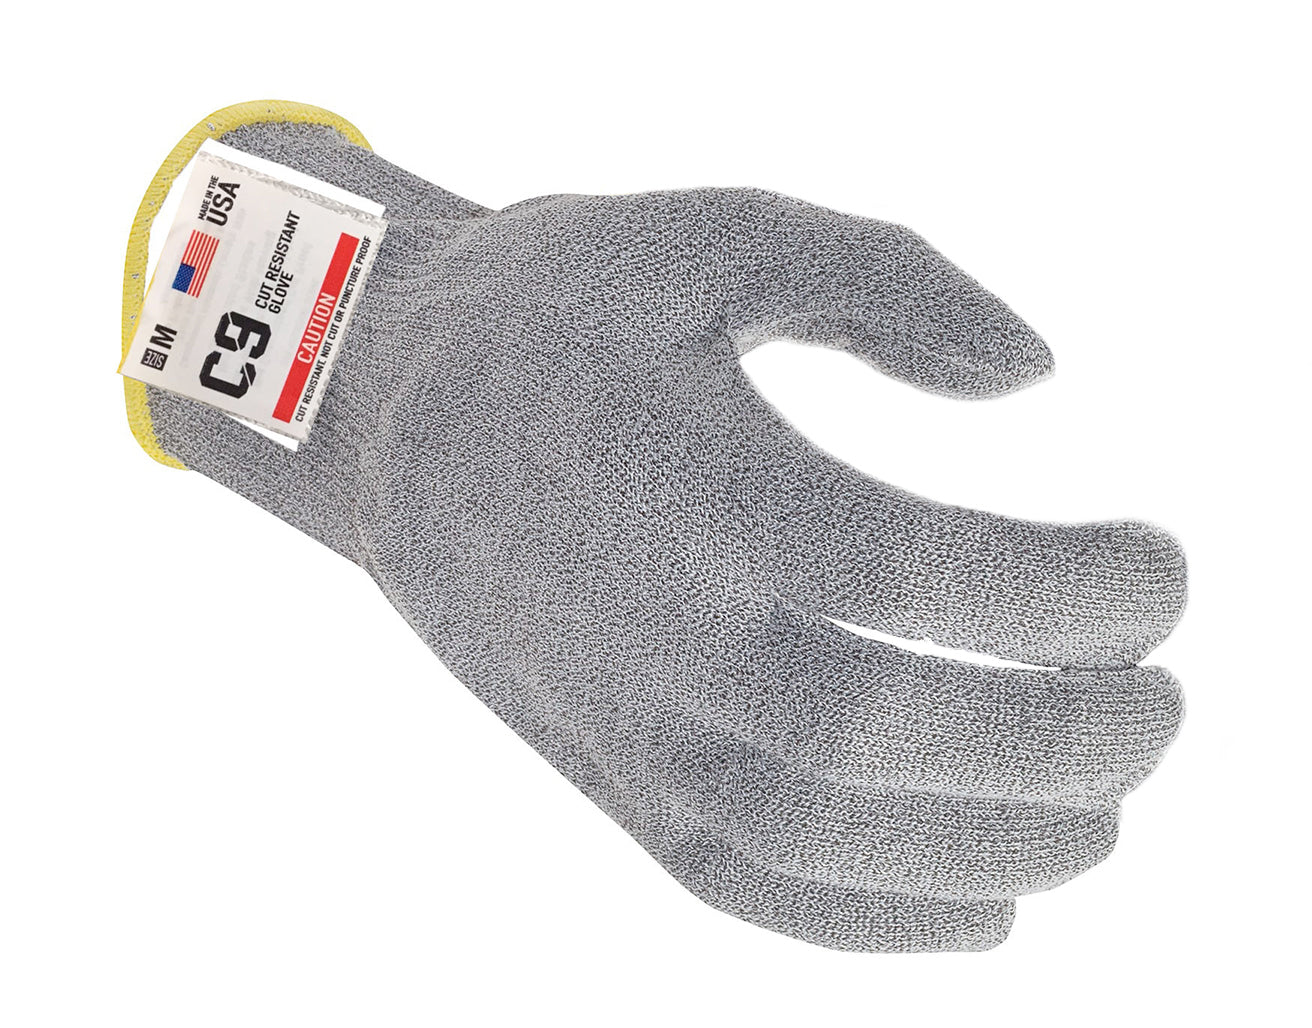 What are the Different Levels of Cut Resistant Gloves?